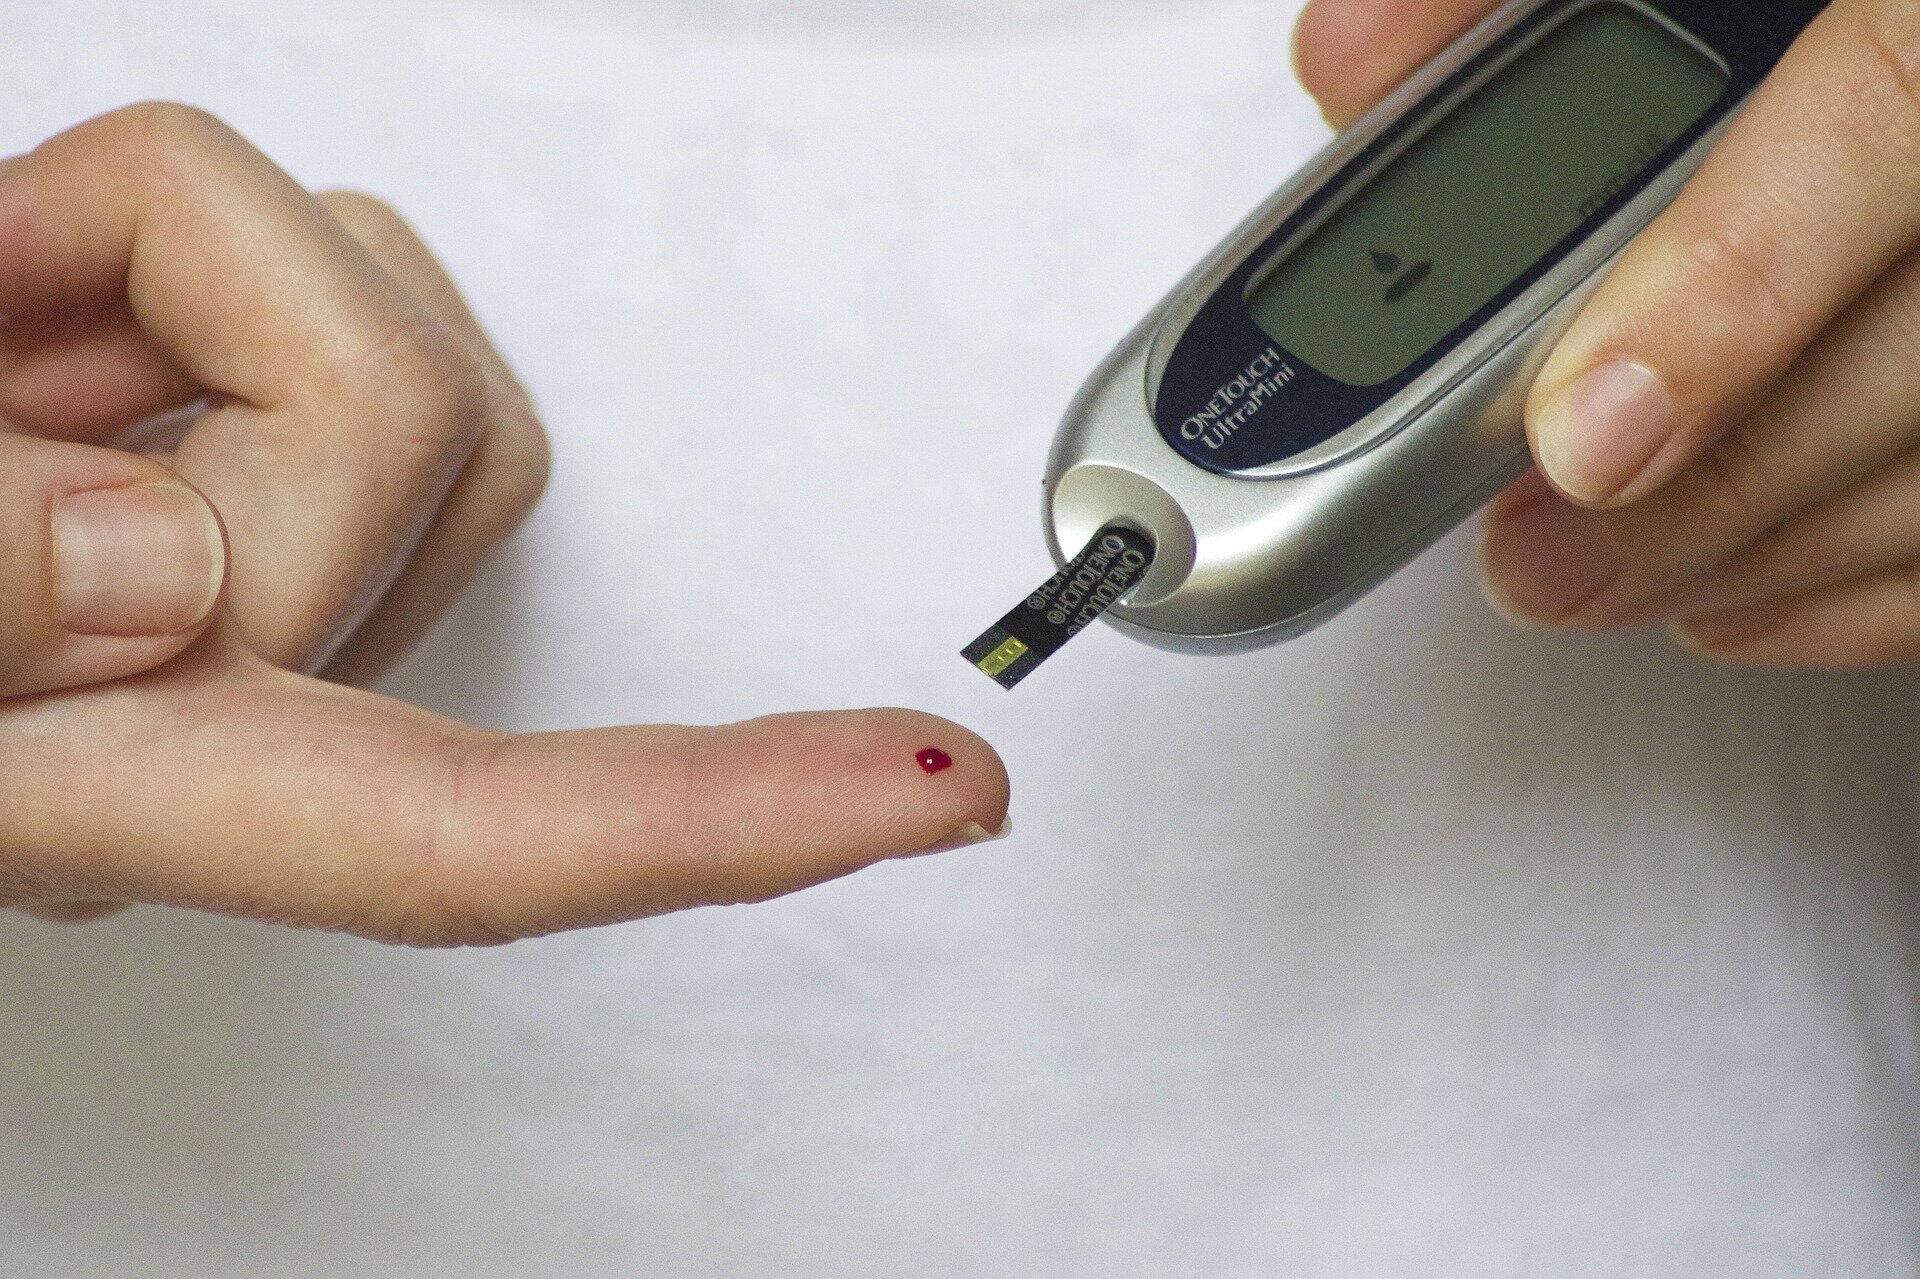 #Reasons for hospital admissions in people with type 2 diabetes are changing